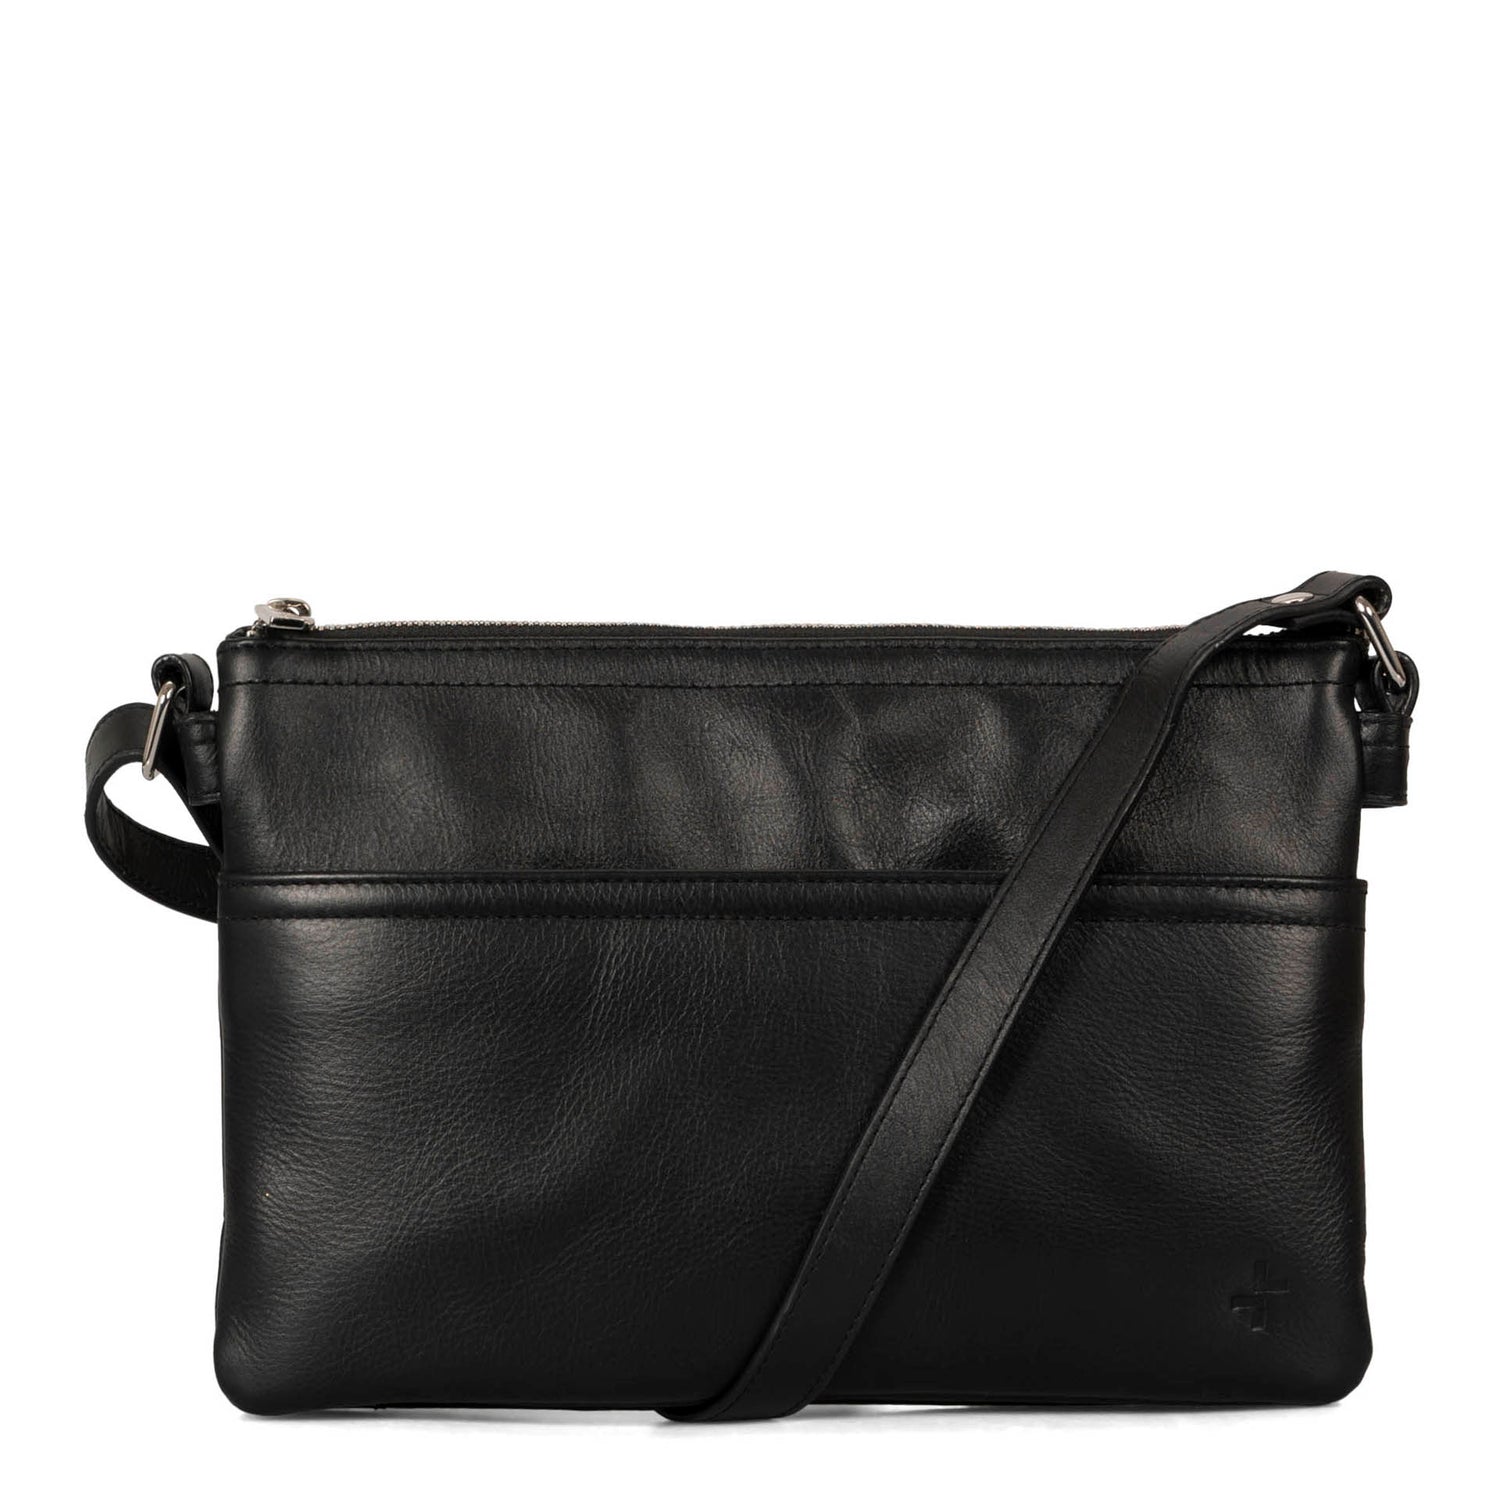 Back view of a black crossbody bag called Basics designed by Tracker showing its supple leather texture and strap.